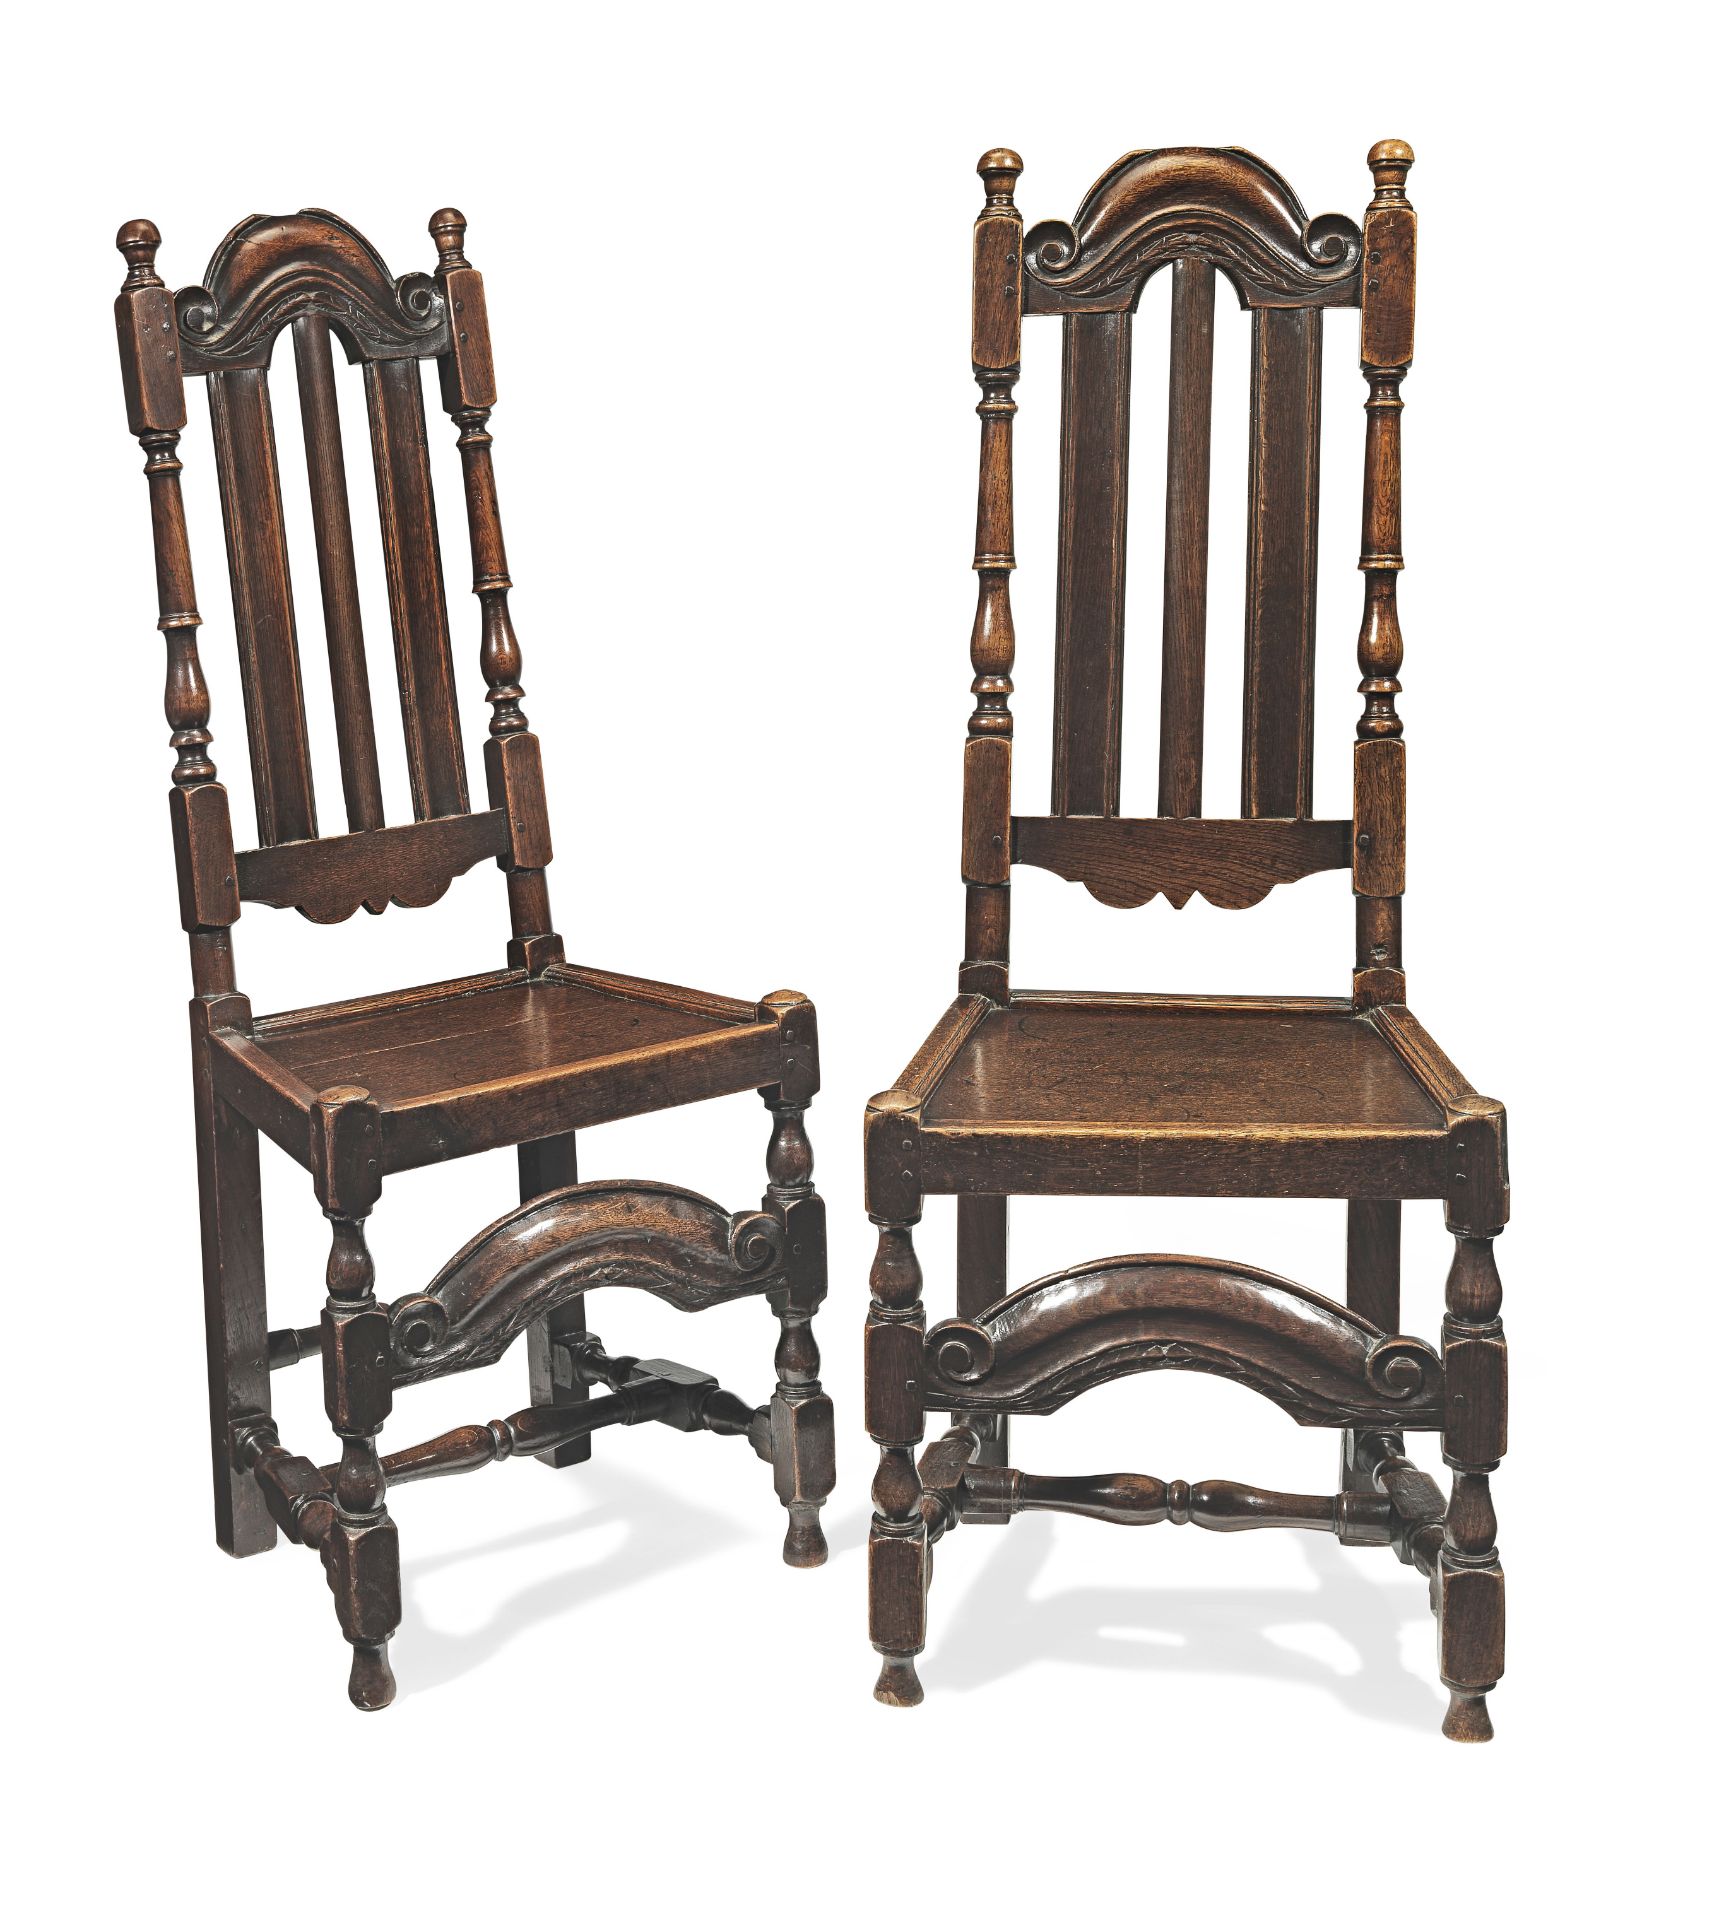 A pair of William & Mary oak slat-back chairs, circa 1690 (2)